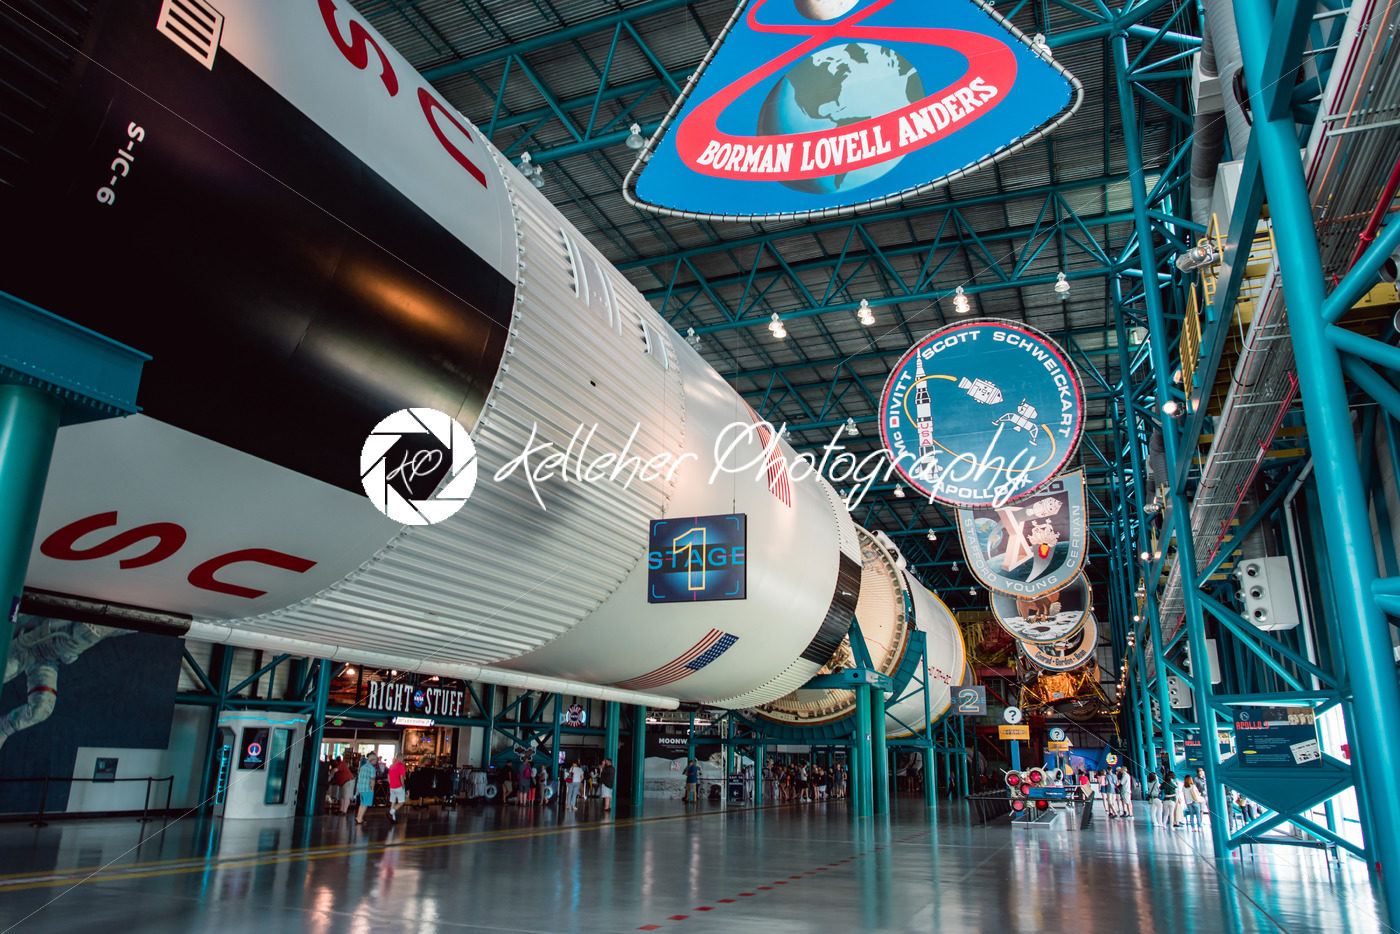 Cape Canaveral, Florida – August 13, 2018: Staurn V Rocket at NASA Kennedy Space Center - Kelleher Photography Store